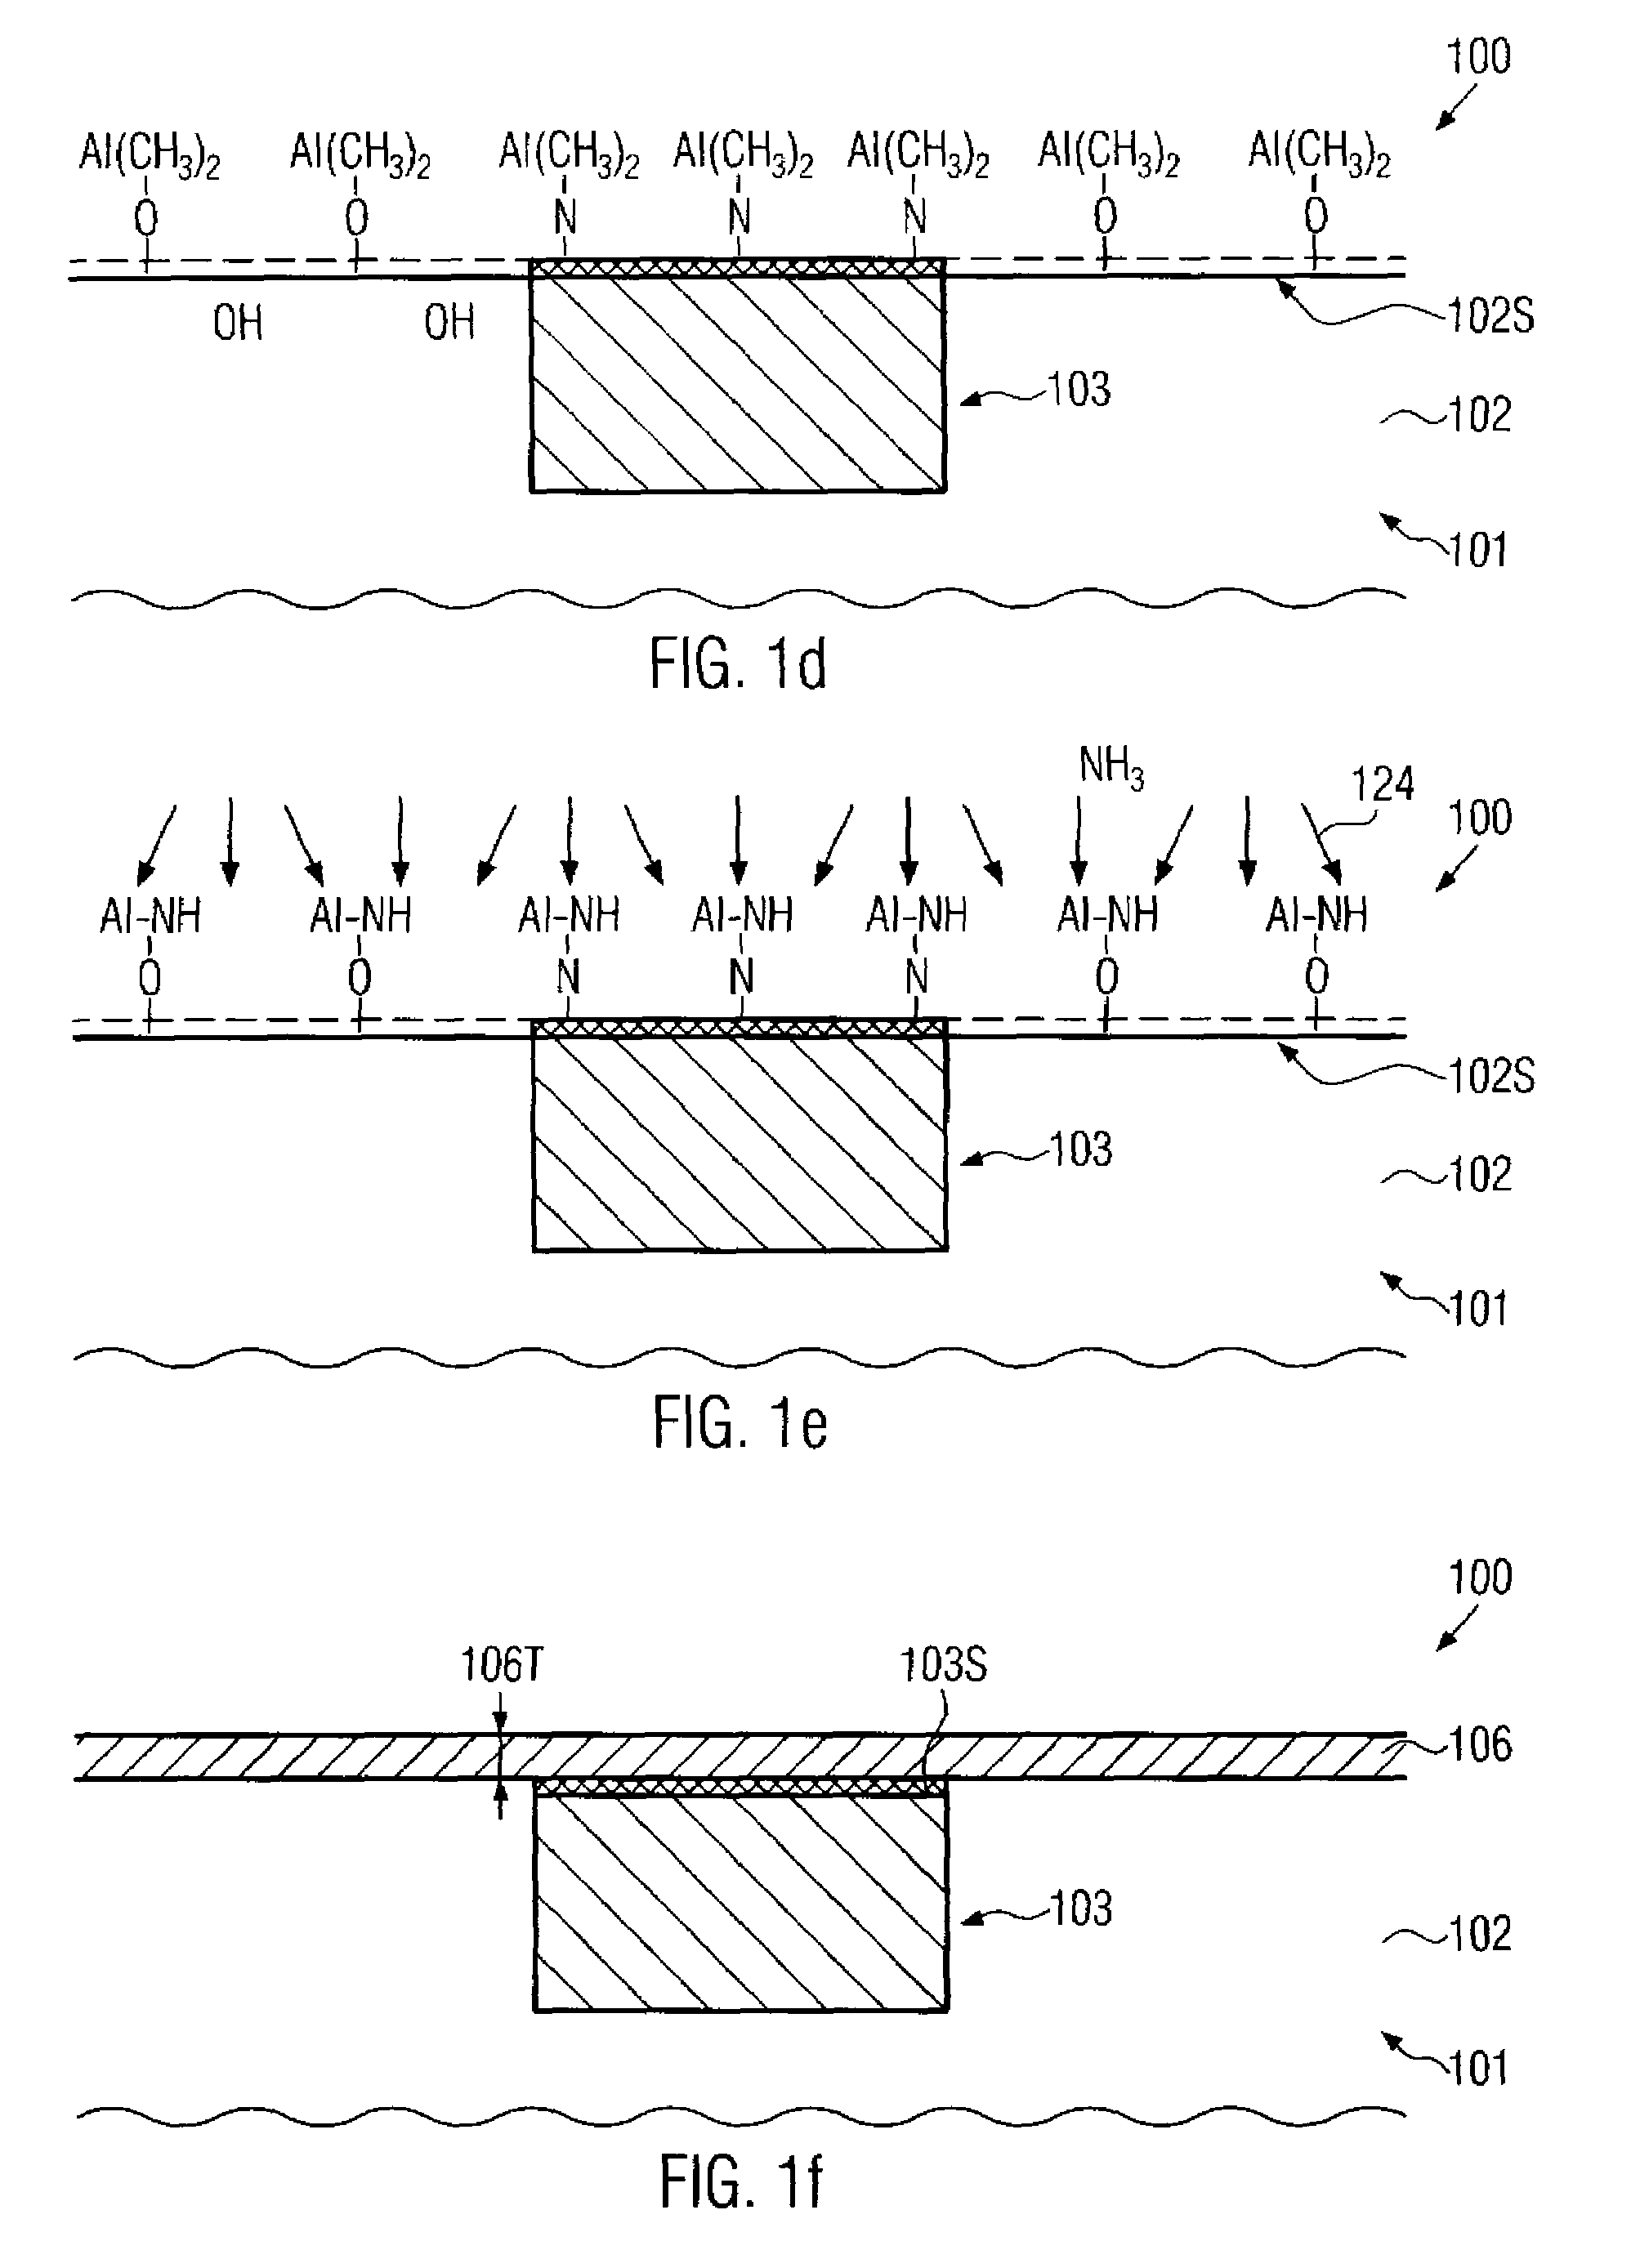 Method of manufracturing increasing reliability of copper-based metallization structures in a microstructure device by using aluminum nitride